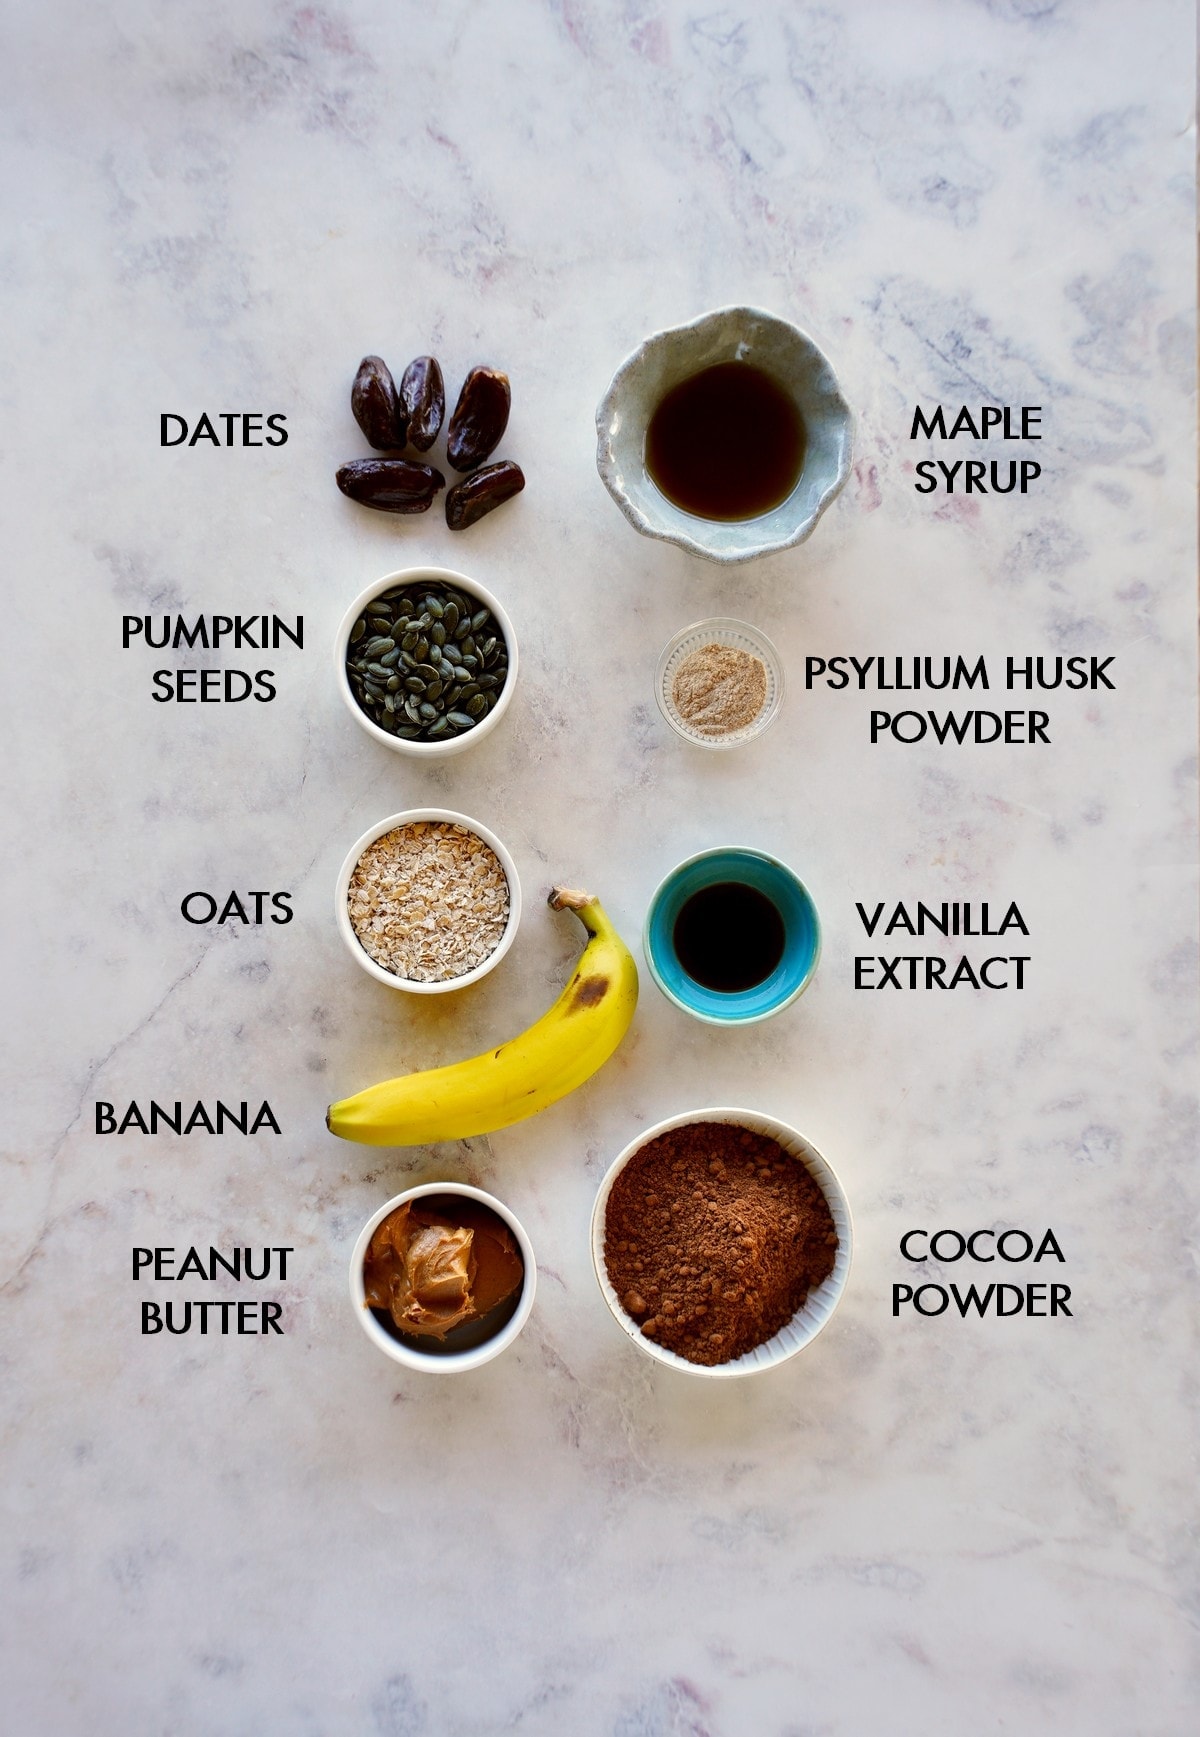 ingredients for banana peanut butter chocolate pie